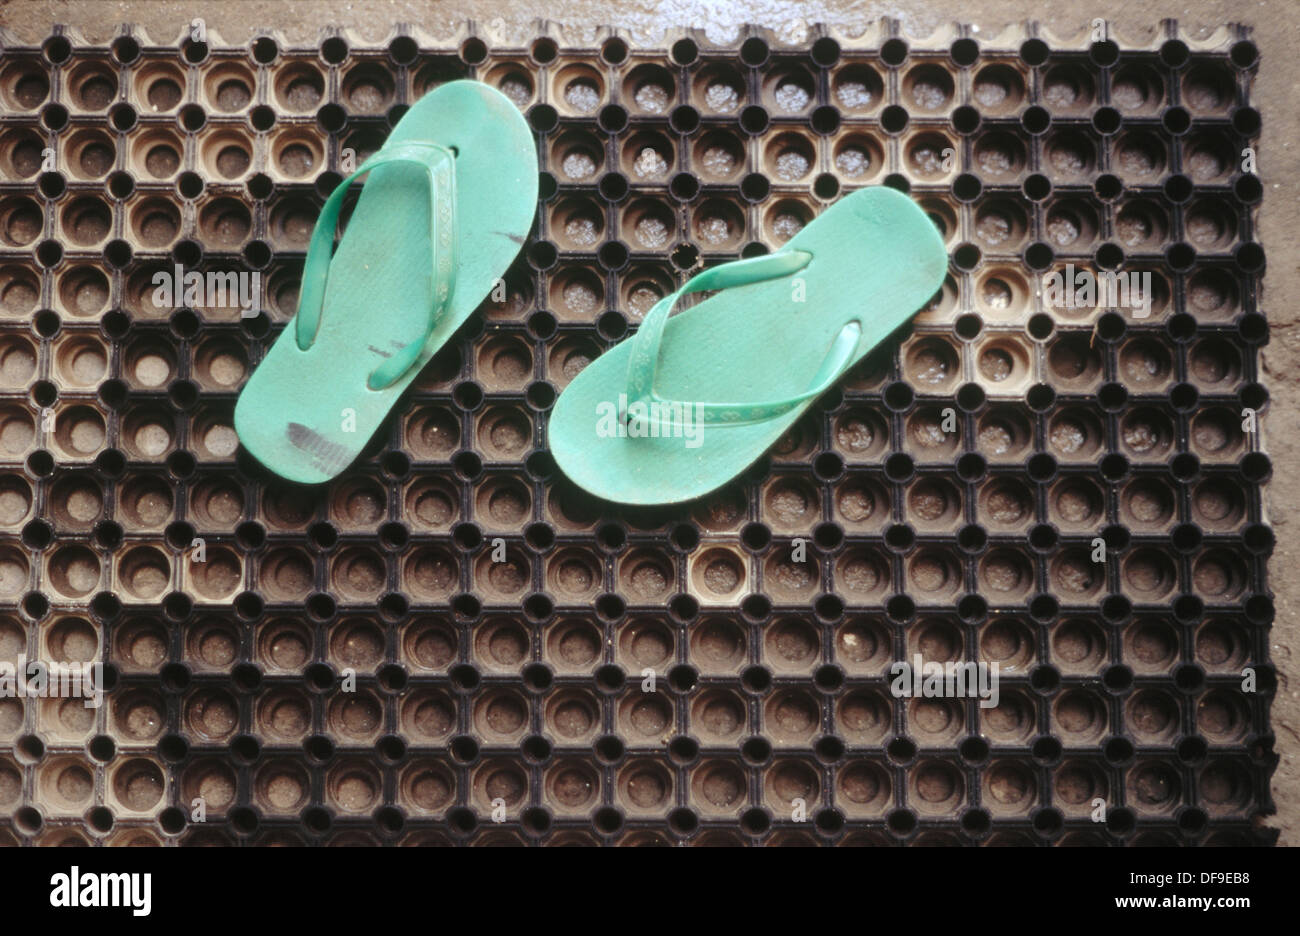 Dirty Flip Flops High Resolution Stock Photography and Images - Alamy